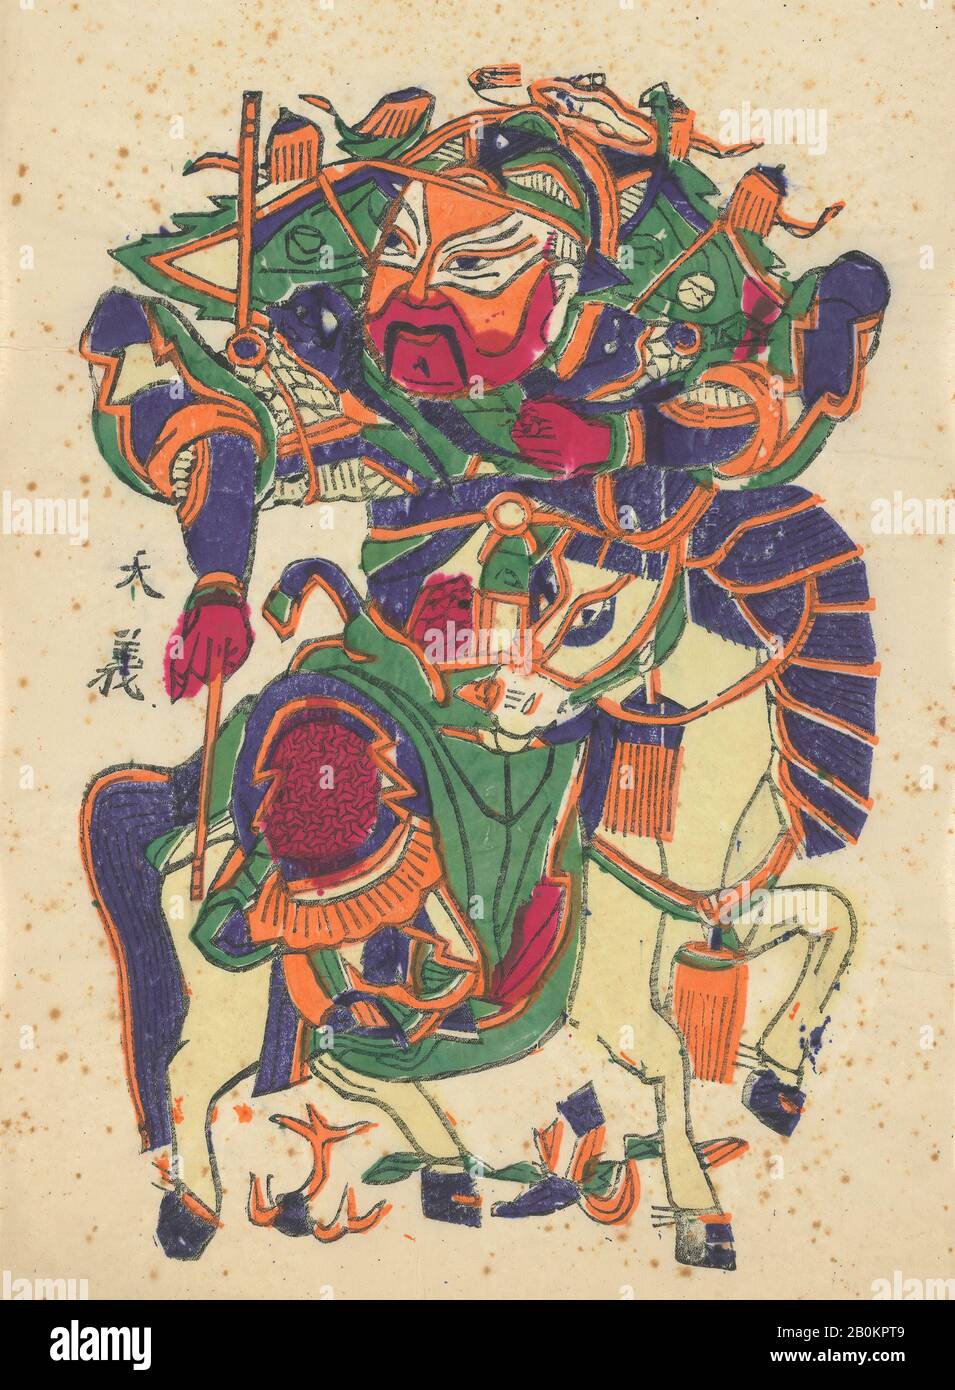 One hundred thirty-five woodblock prints including New Year's pictures (nianhua), door gods, historical figures and Taoist deities, China, 19th–20th century, China, Polychrome woodblock print; ink and color on paper, Image: 18 1/8 in. × 11 in. (46 × 27.9 cm), Prints Stock Photo